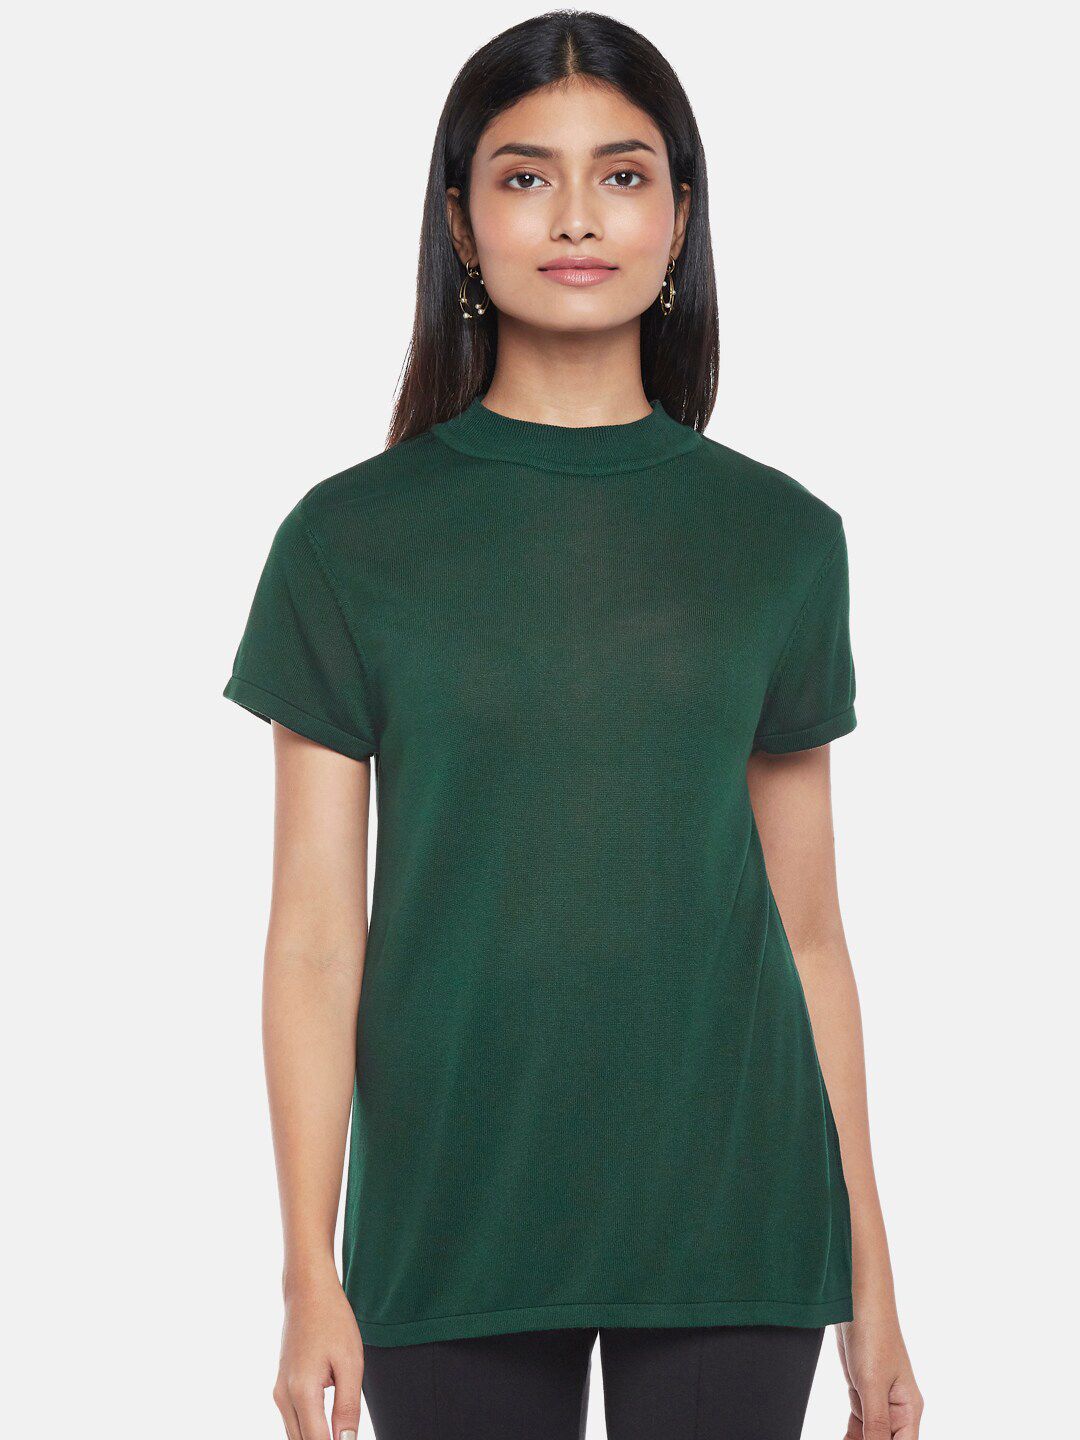 Annabelle by Pantaloons Women Green Top Price in India